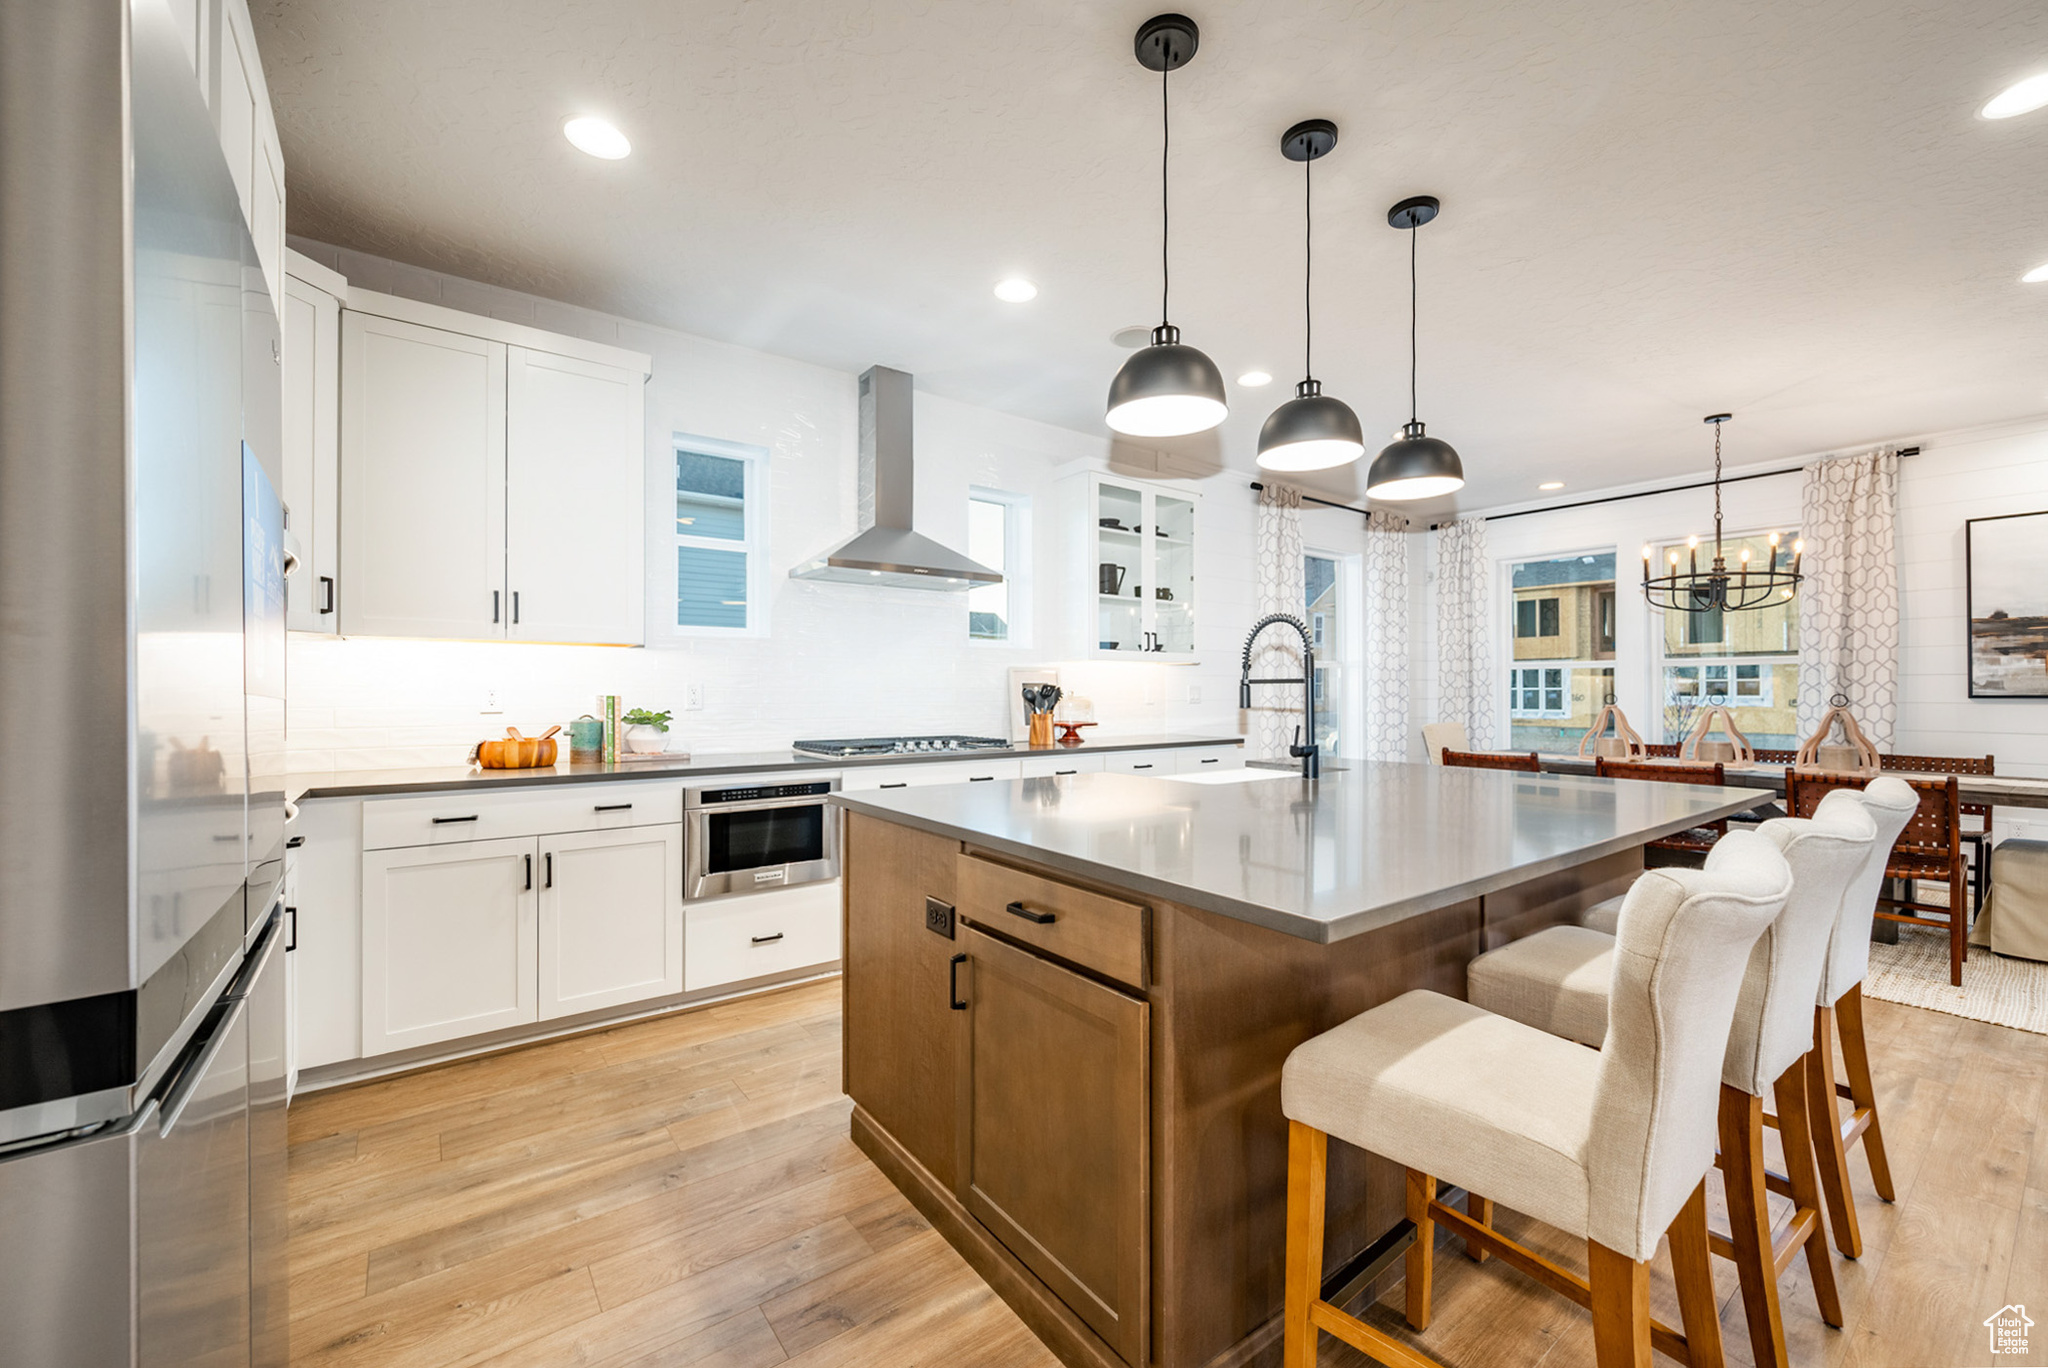 Kitchen featuring decorative light fixtures, appliances with stainless steel finishes, wall chimney exhaust hood, and light hardwood / wood-style flooring